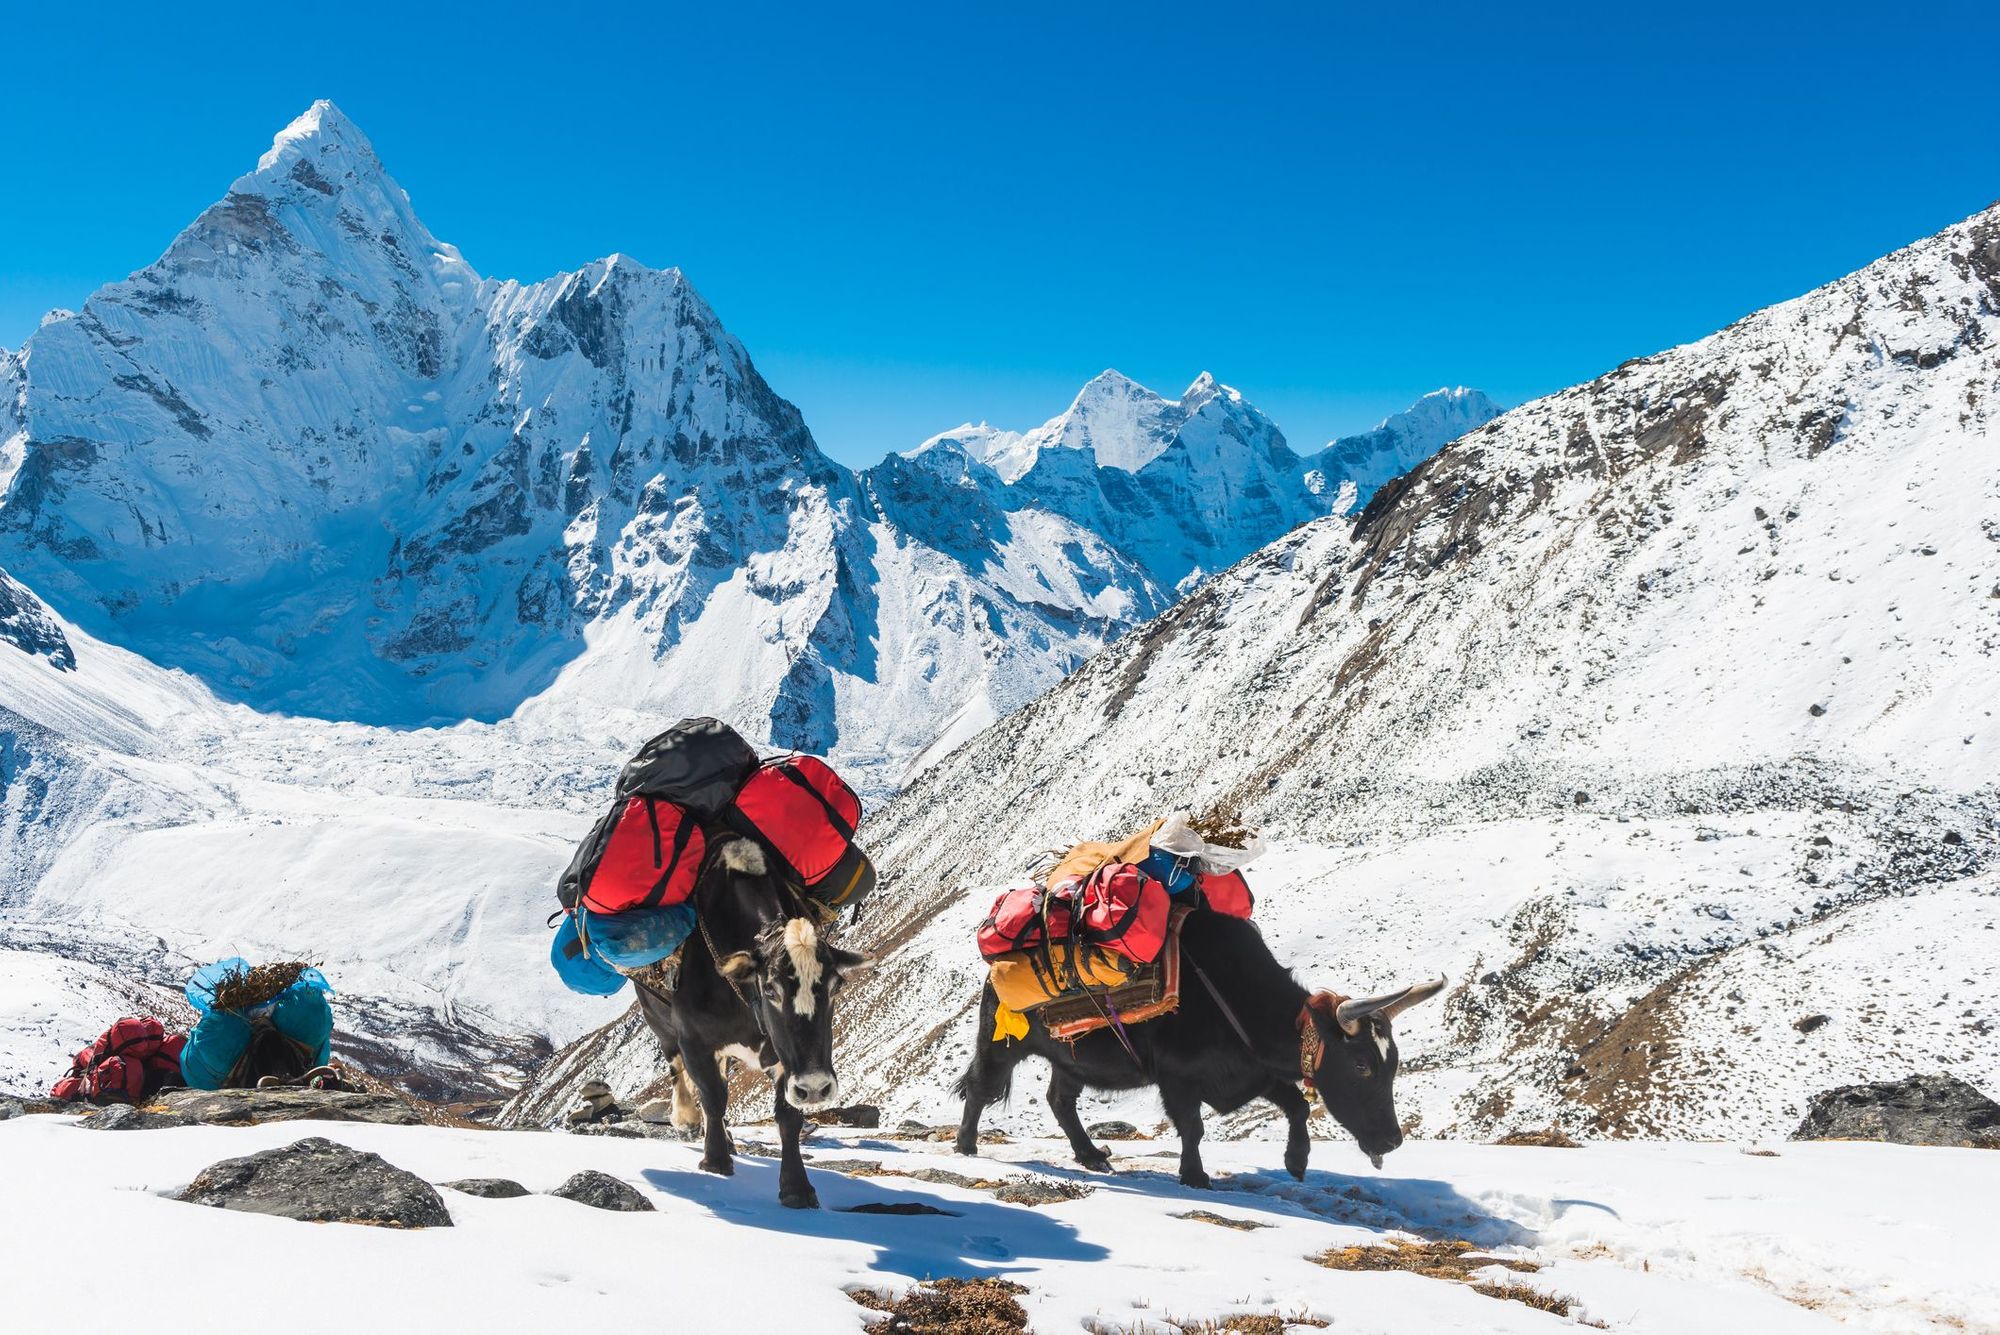 Two yaks carrying hikers' backpacks en route to Everest Base Camp in the Himalayas.